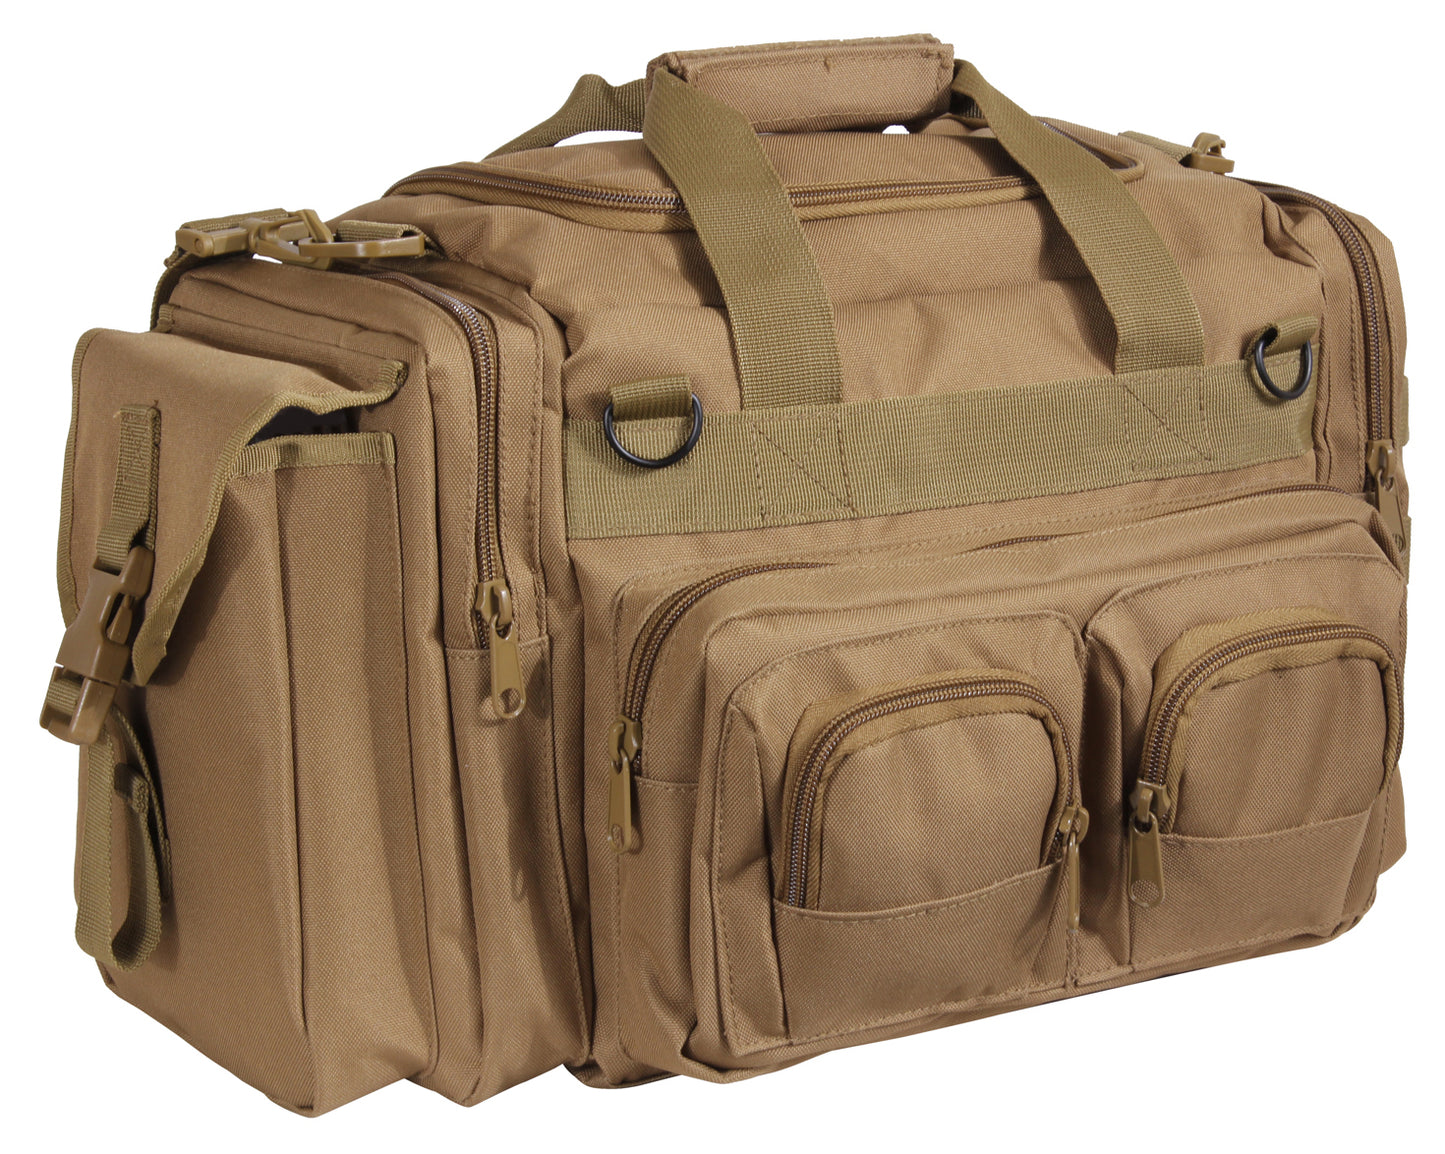 Milspec Concealed Carry Bag Concealed Carry Bags MilTac Tactical Military Outdoor Gear Australia